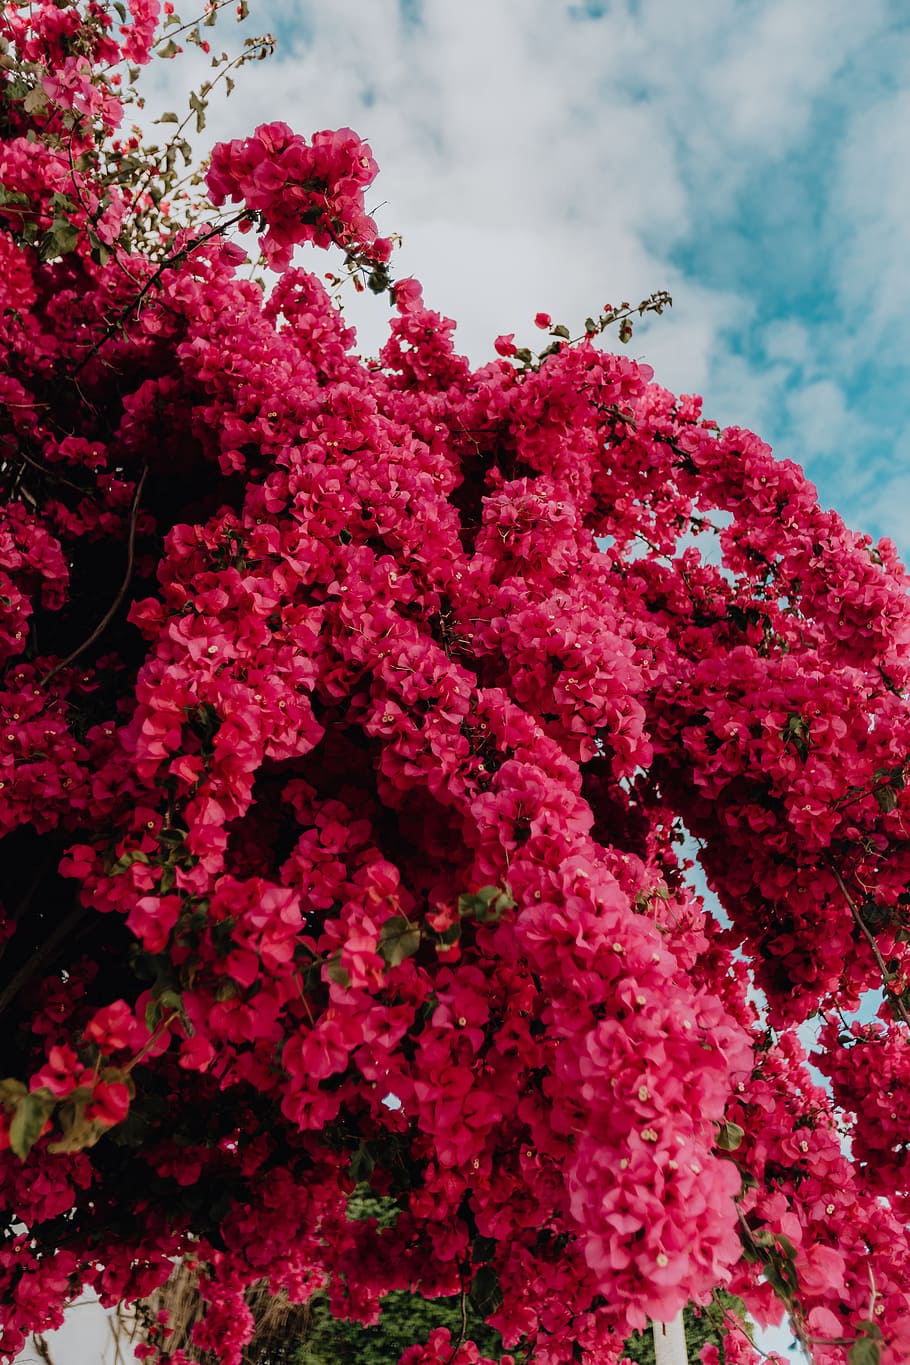 Hd Wallpaper Pink Bougainvillea Flowers Against The Traditional